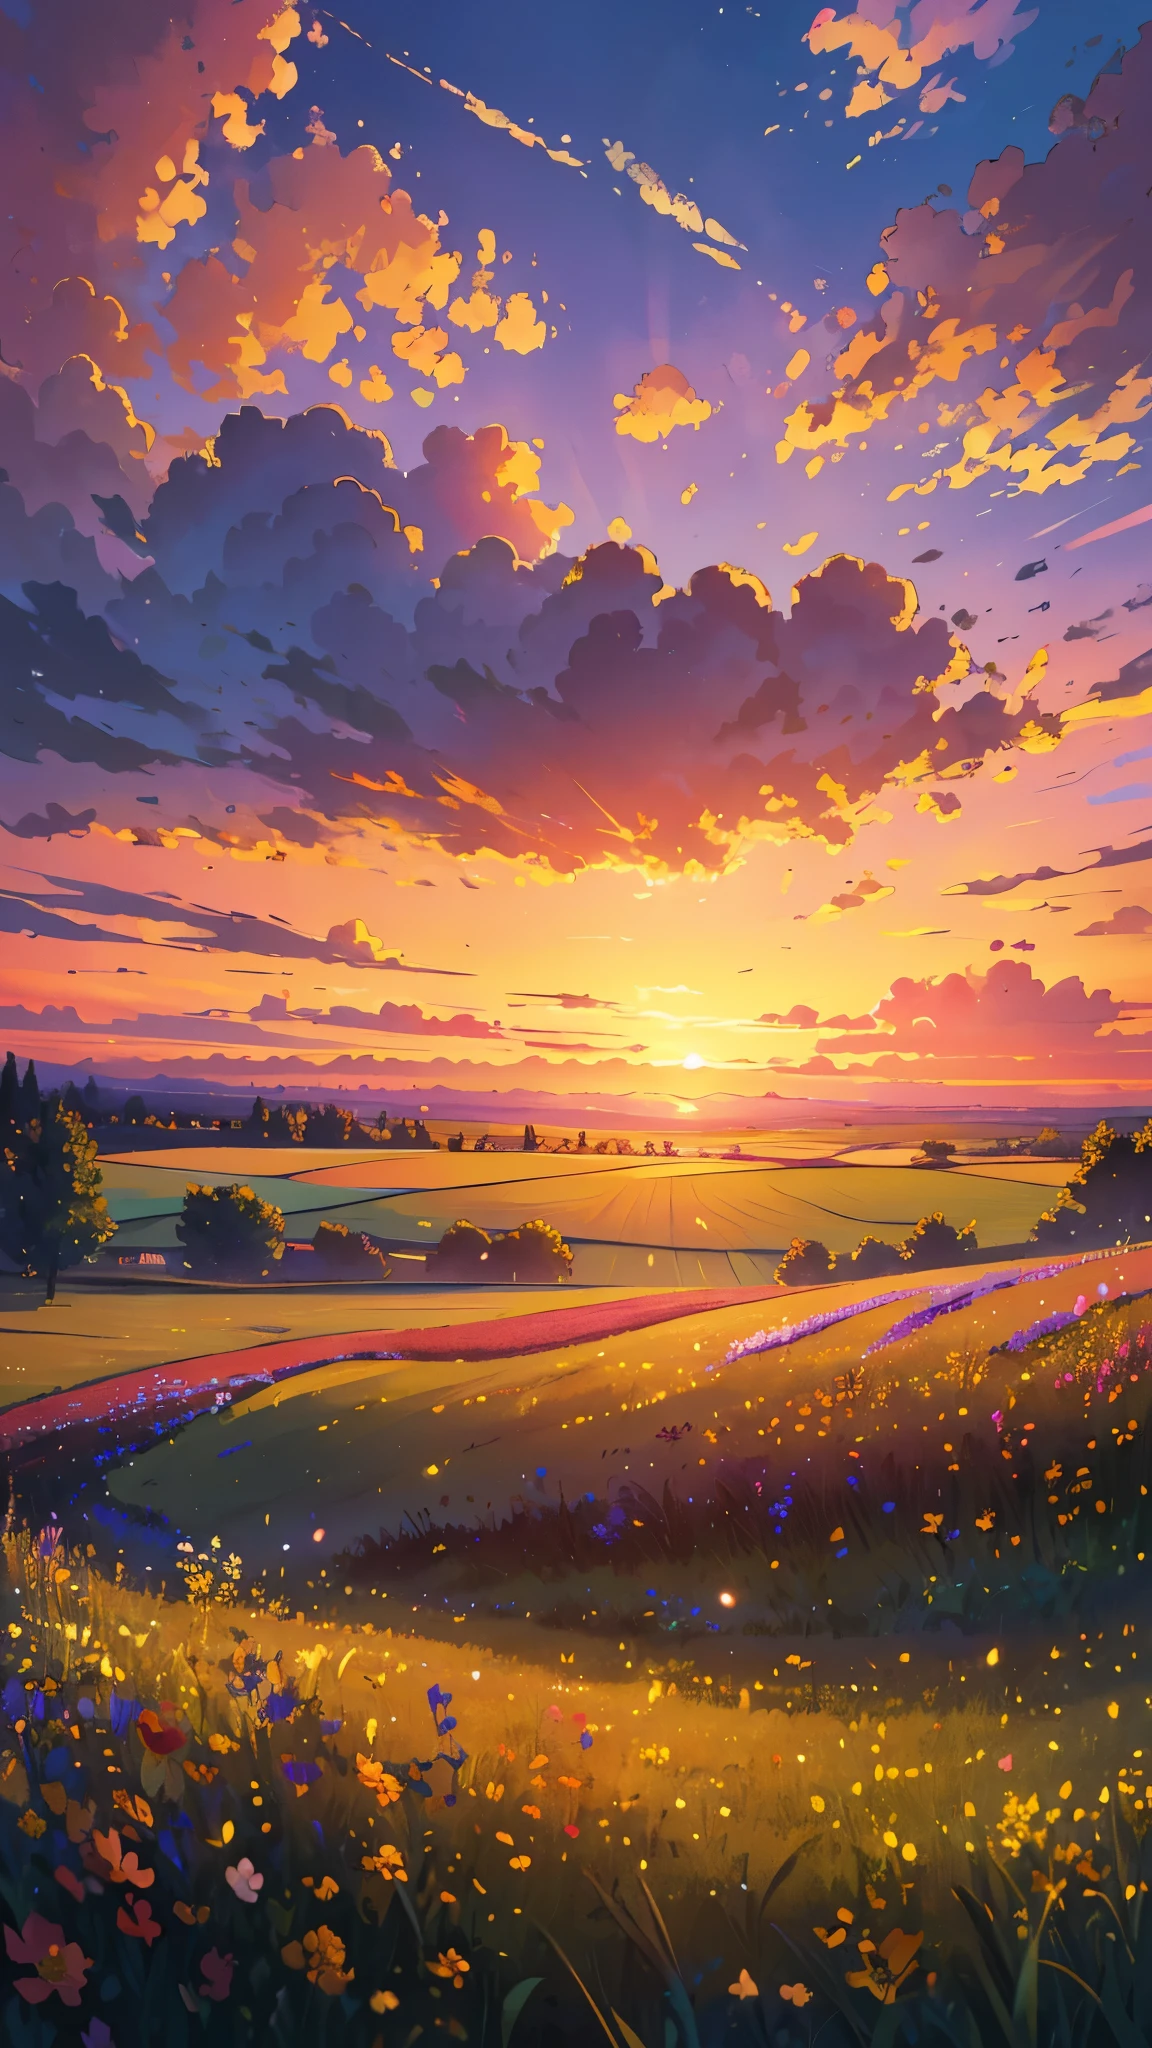 (best quality,highres,masterpiece:1.2),ultra-detailed,realistic:1.37,a beautiful image,a field of flowers,a sunset view,low angle view,focus on flowers and grass,sunset colors,vibrant colors,warm tones,soft lighting,subtle shadows,paint-like rendering,impressionistic style,field of wildflowers,waving grass,peaceful atmosphere,sunset glow,serene ambiance,tranquil setting,immersive perspective,nature beauty,breathtaking scene.